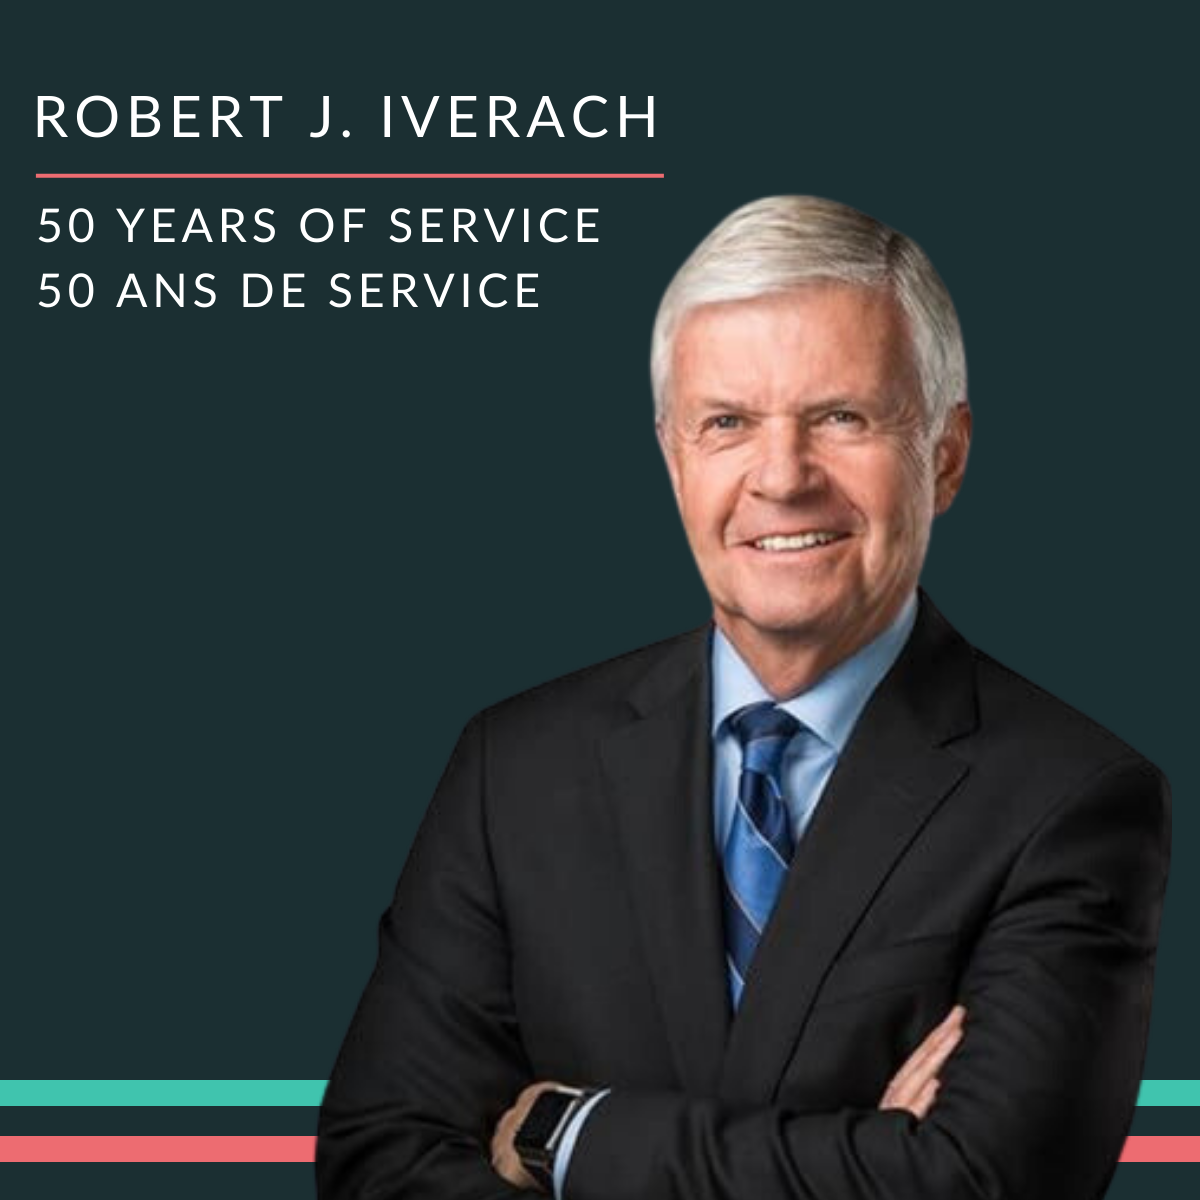 Congratulations to Robert J. Iverach, celebrating 50 years of contributions to the legal profession